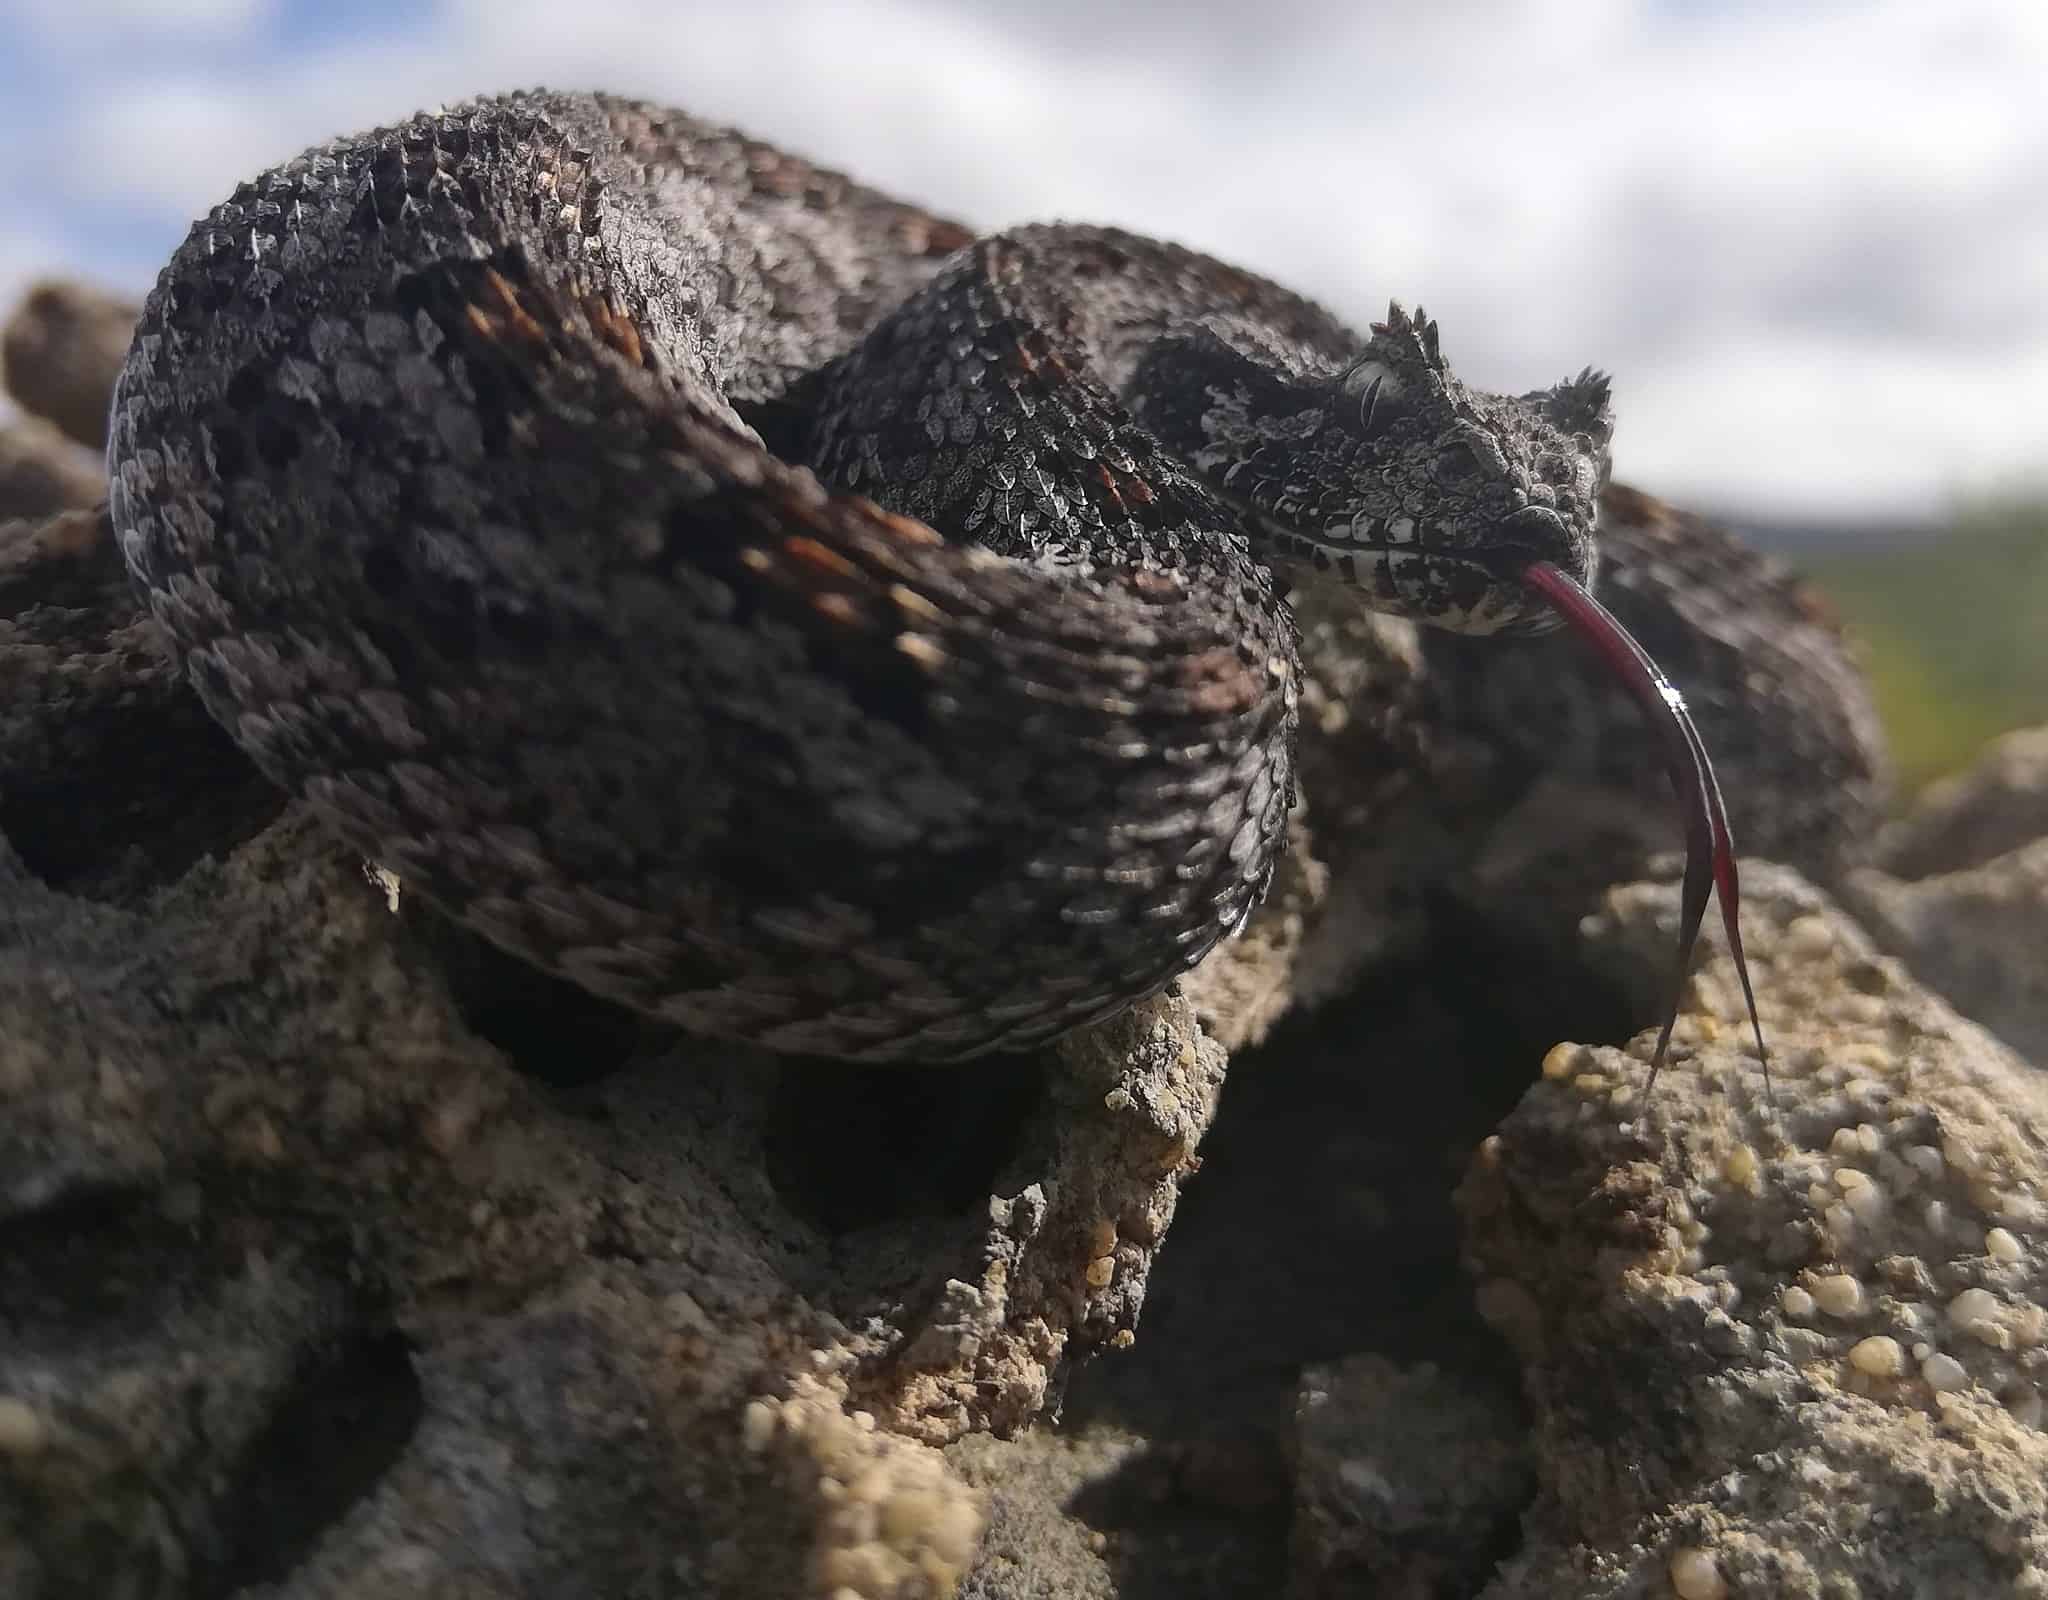 Southern adders (Bitis armata) are native to South Africa